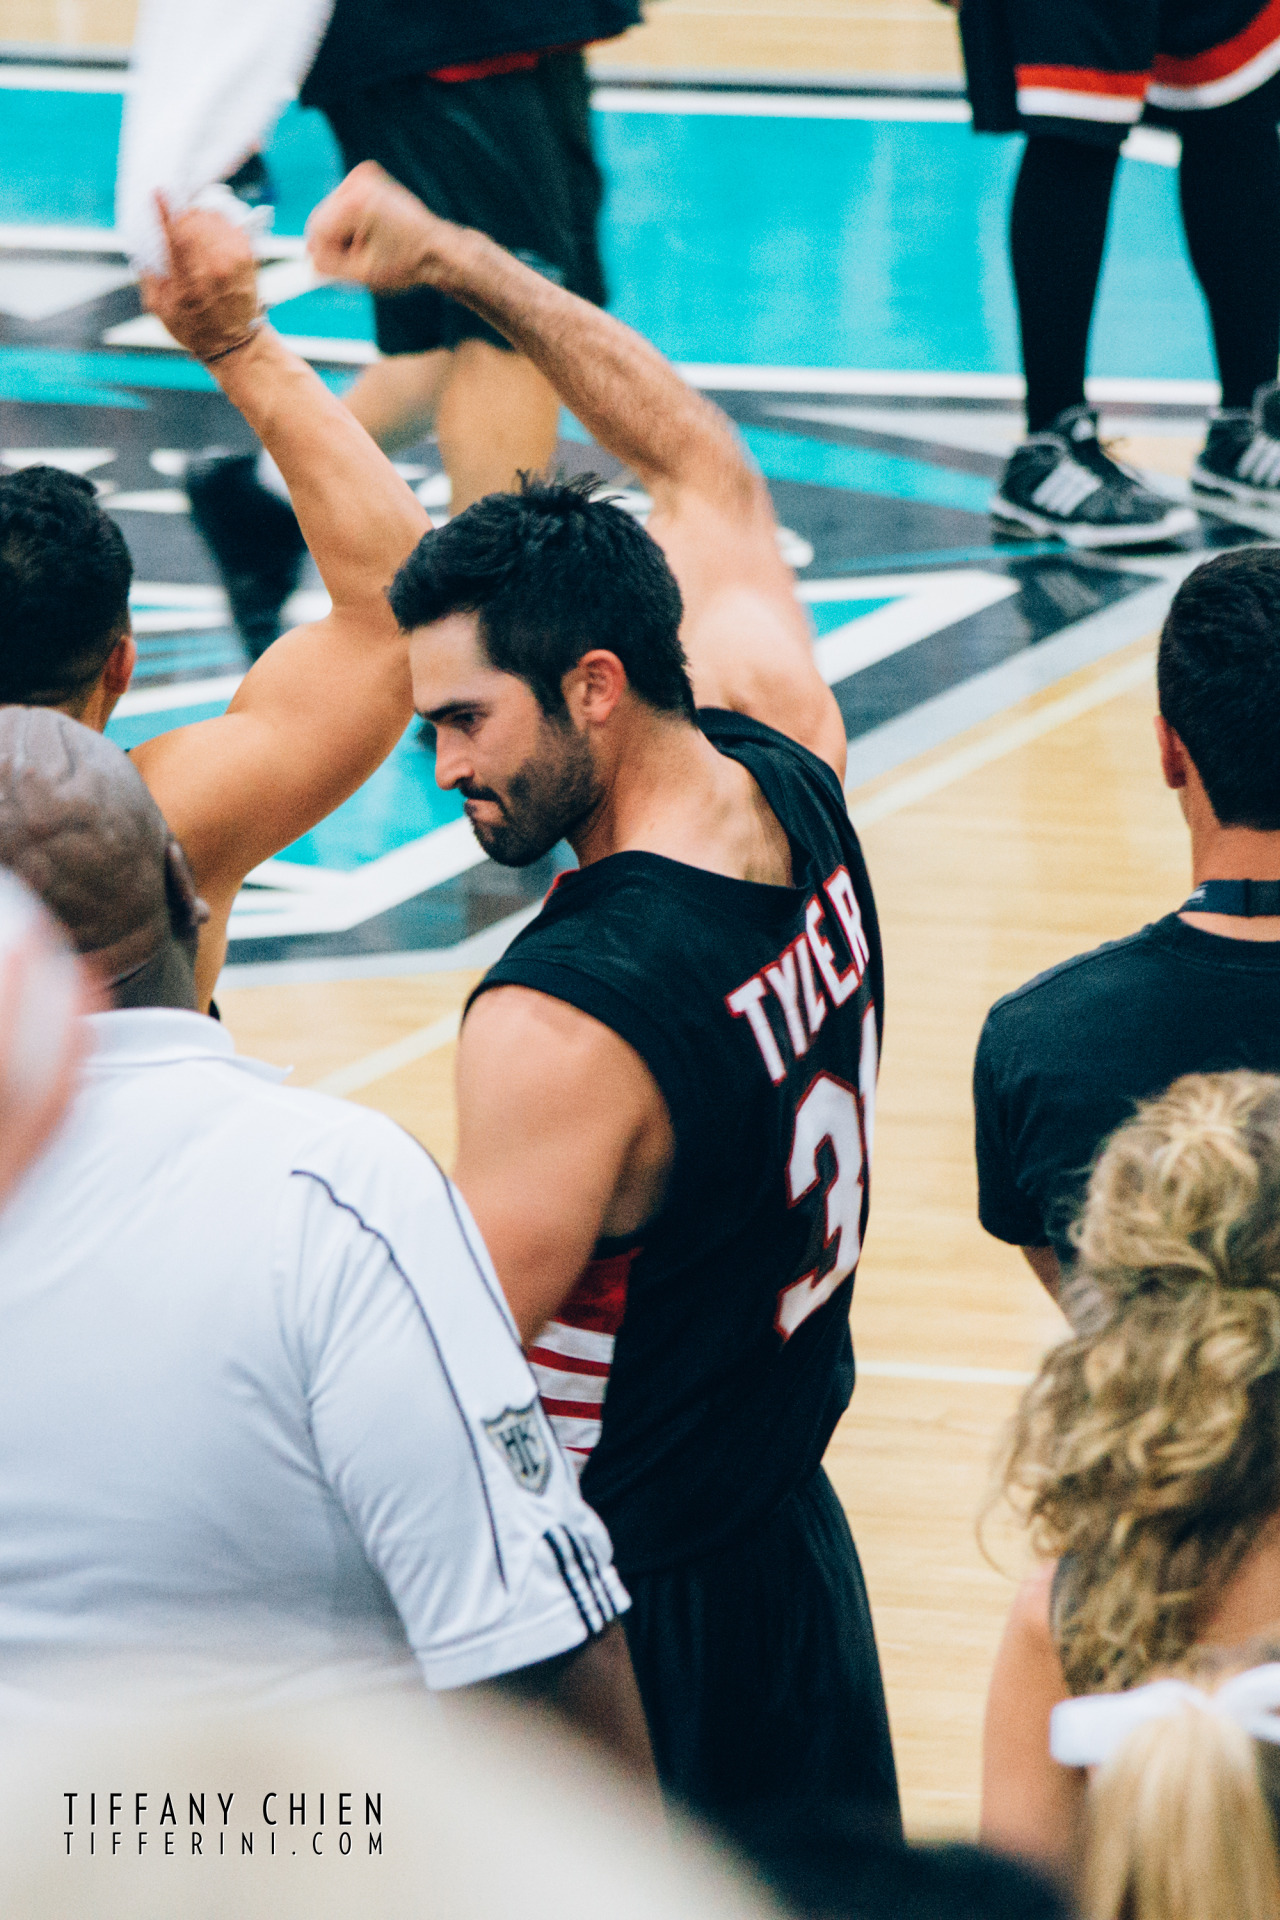 tifferini:  Tyler Hoechlin cheering after his team scoredHollywood Knights [3.15.14]Do